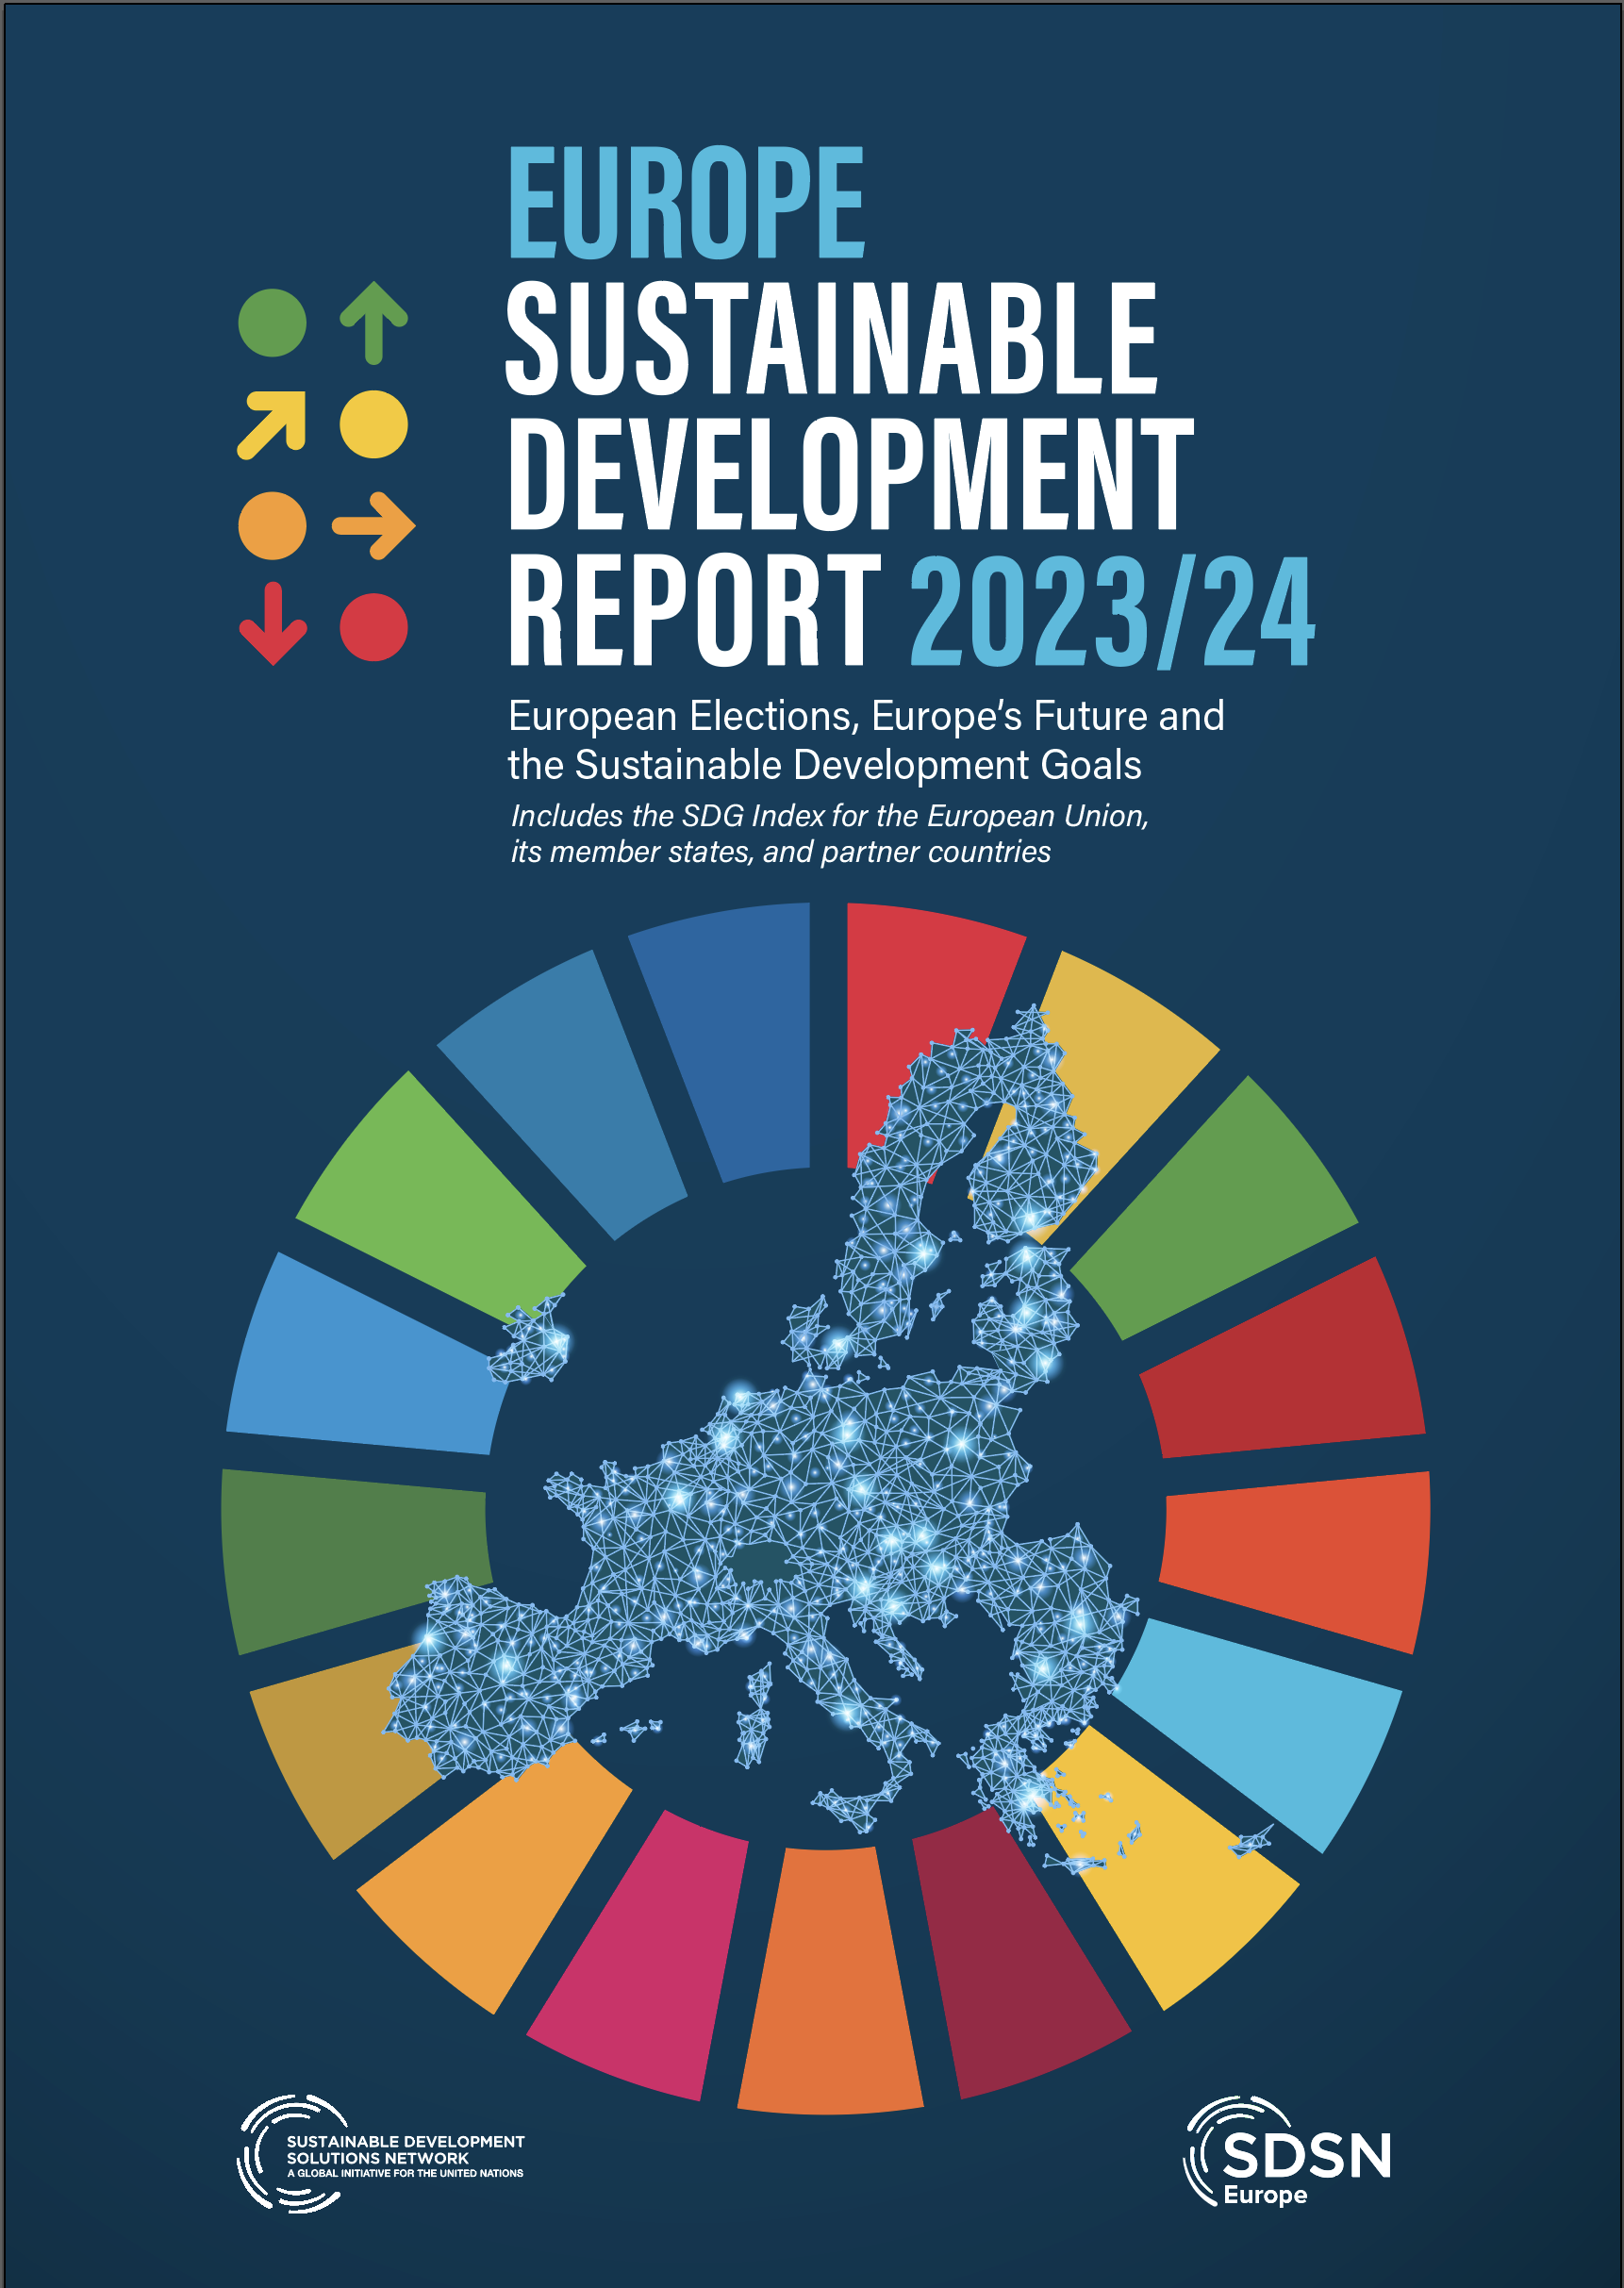 Cover of the Europe Sustainable Development Report 2023/24